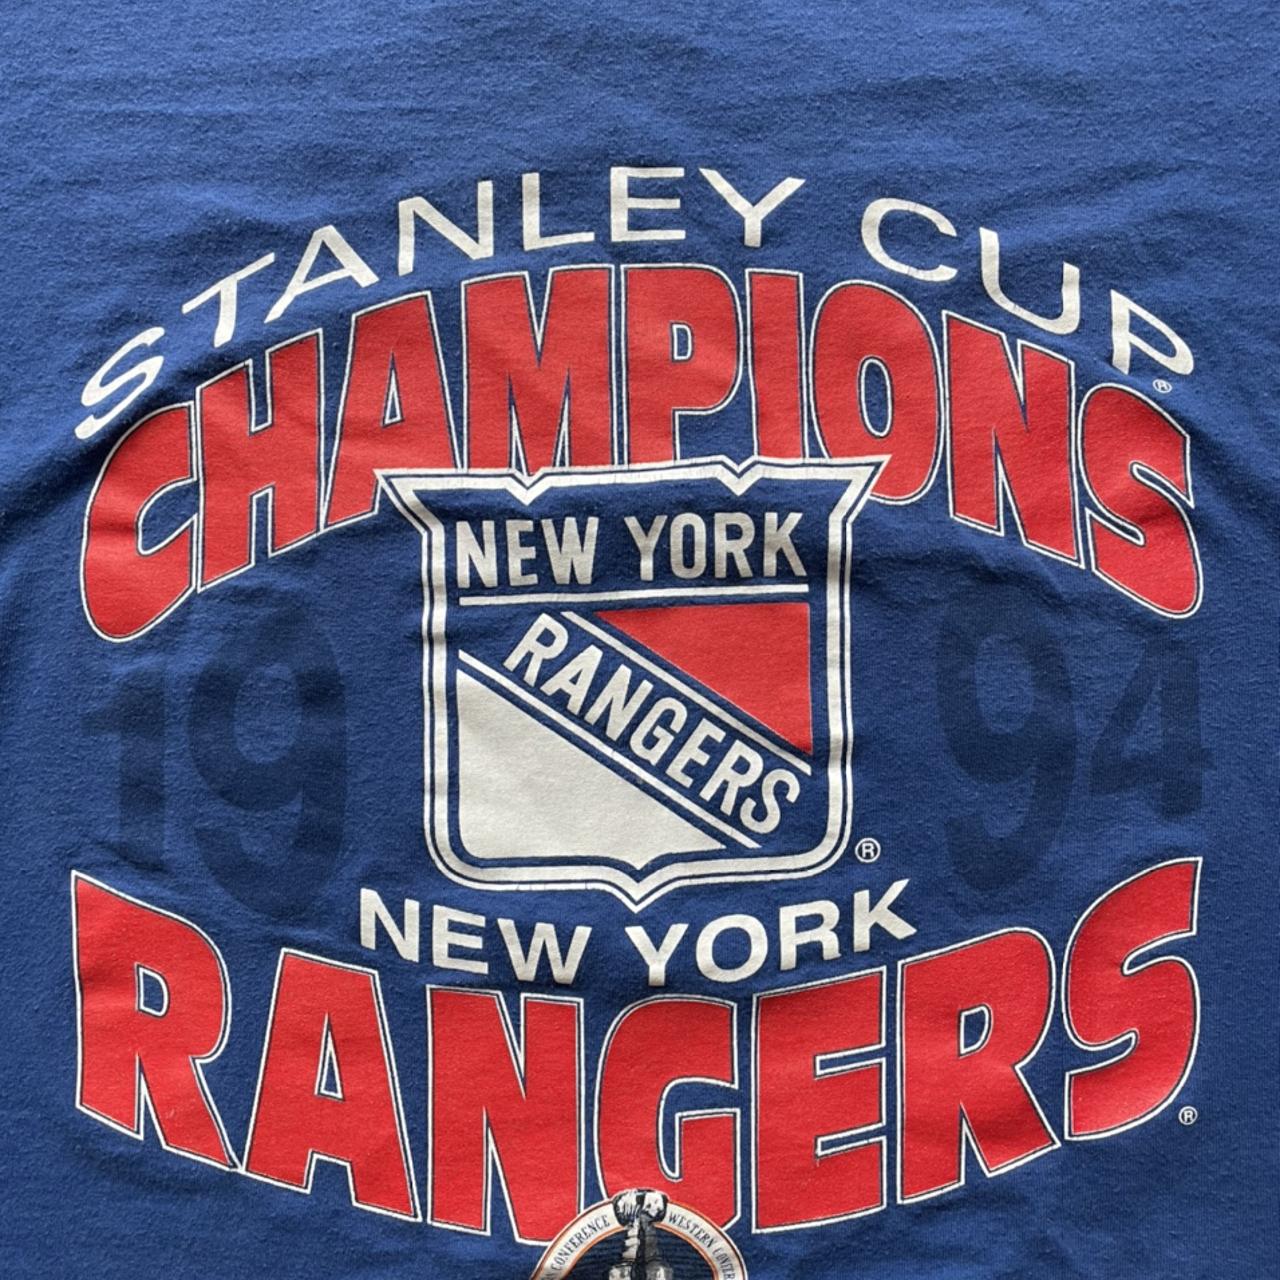 NEW YORK RANGERS VANCOUVER CANUCKS VINTAGE 1994 STANLEY CUP FINALS #1 -  Bucks County Baseball Co.